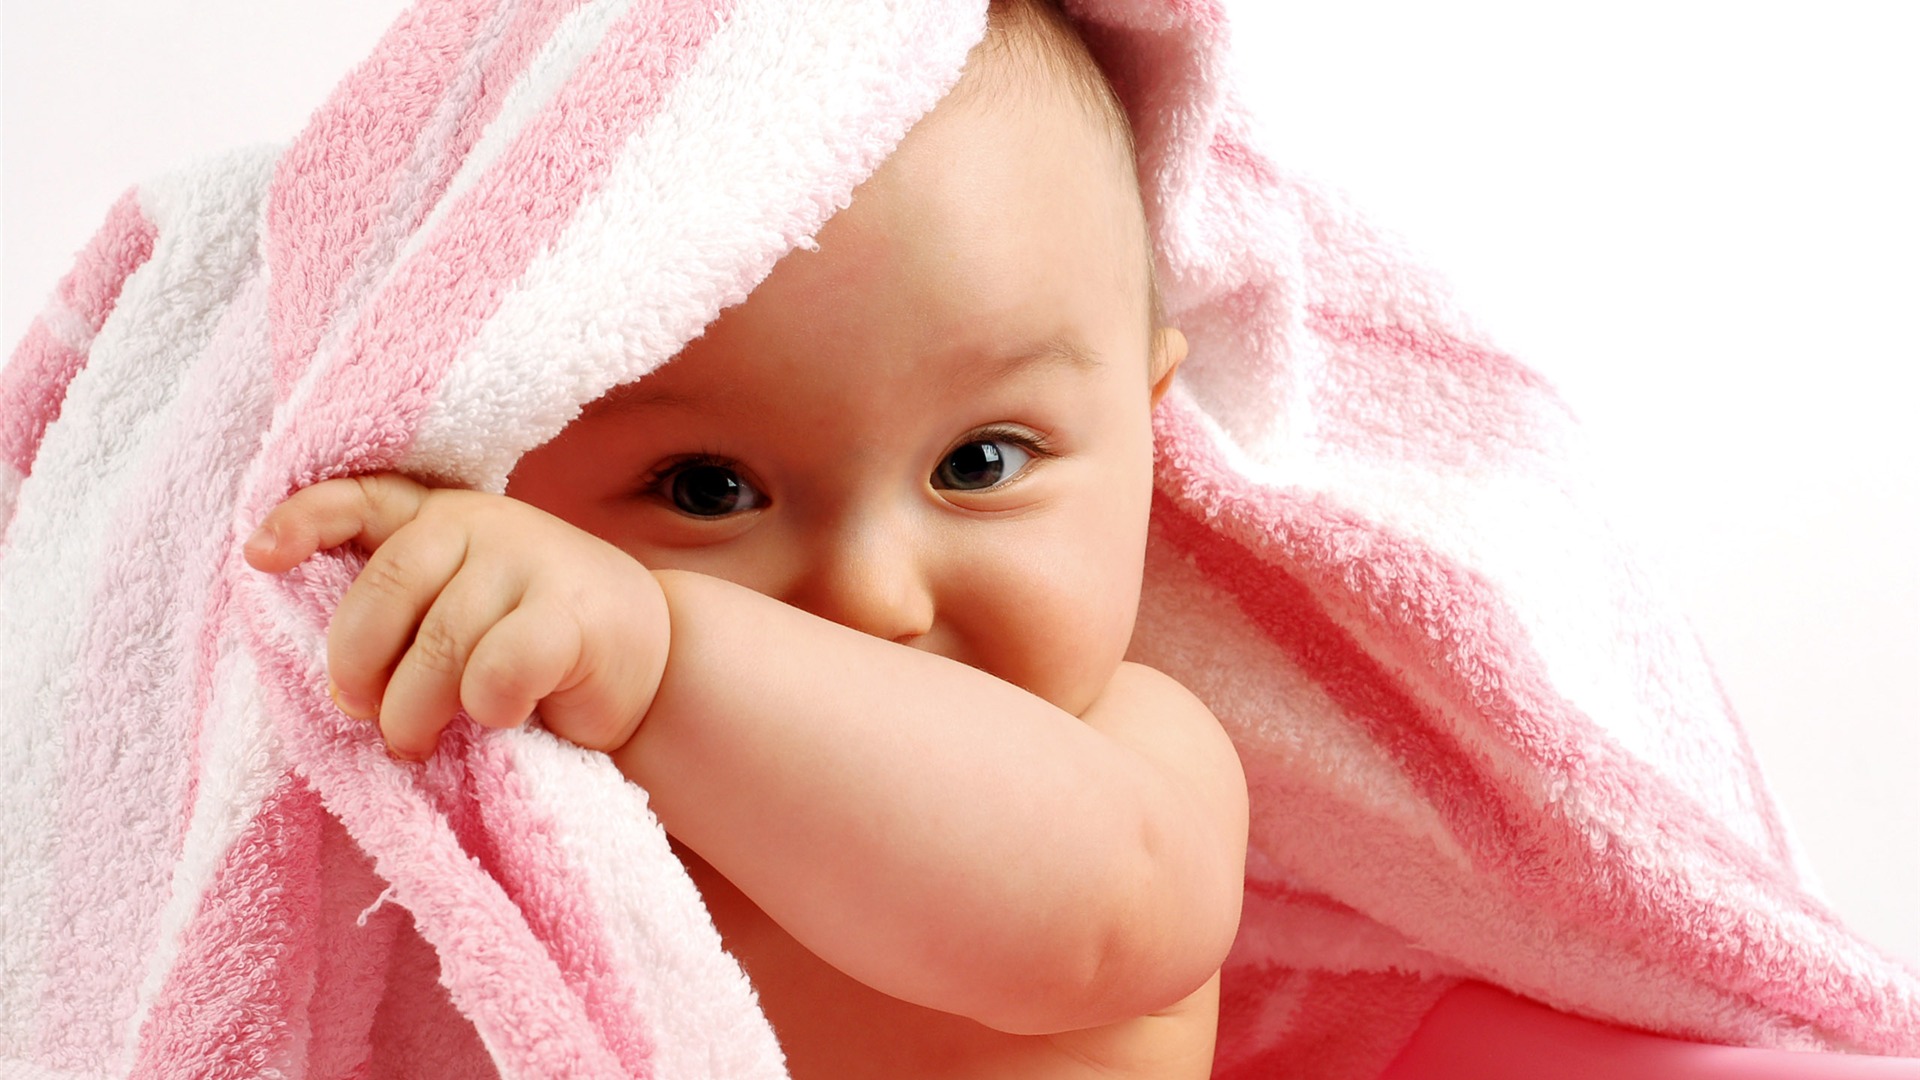 Cute Baby Wallpapers (3) #1 - 1920x1080